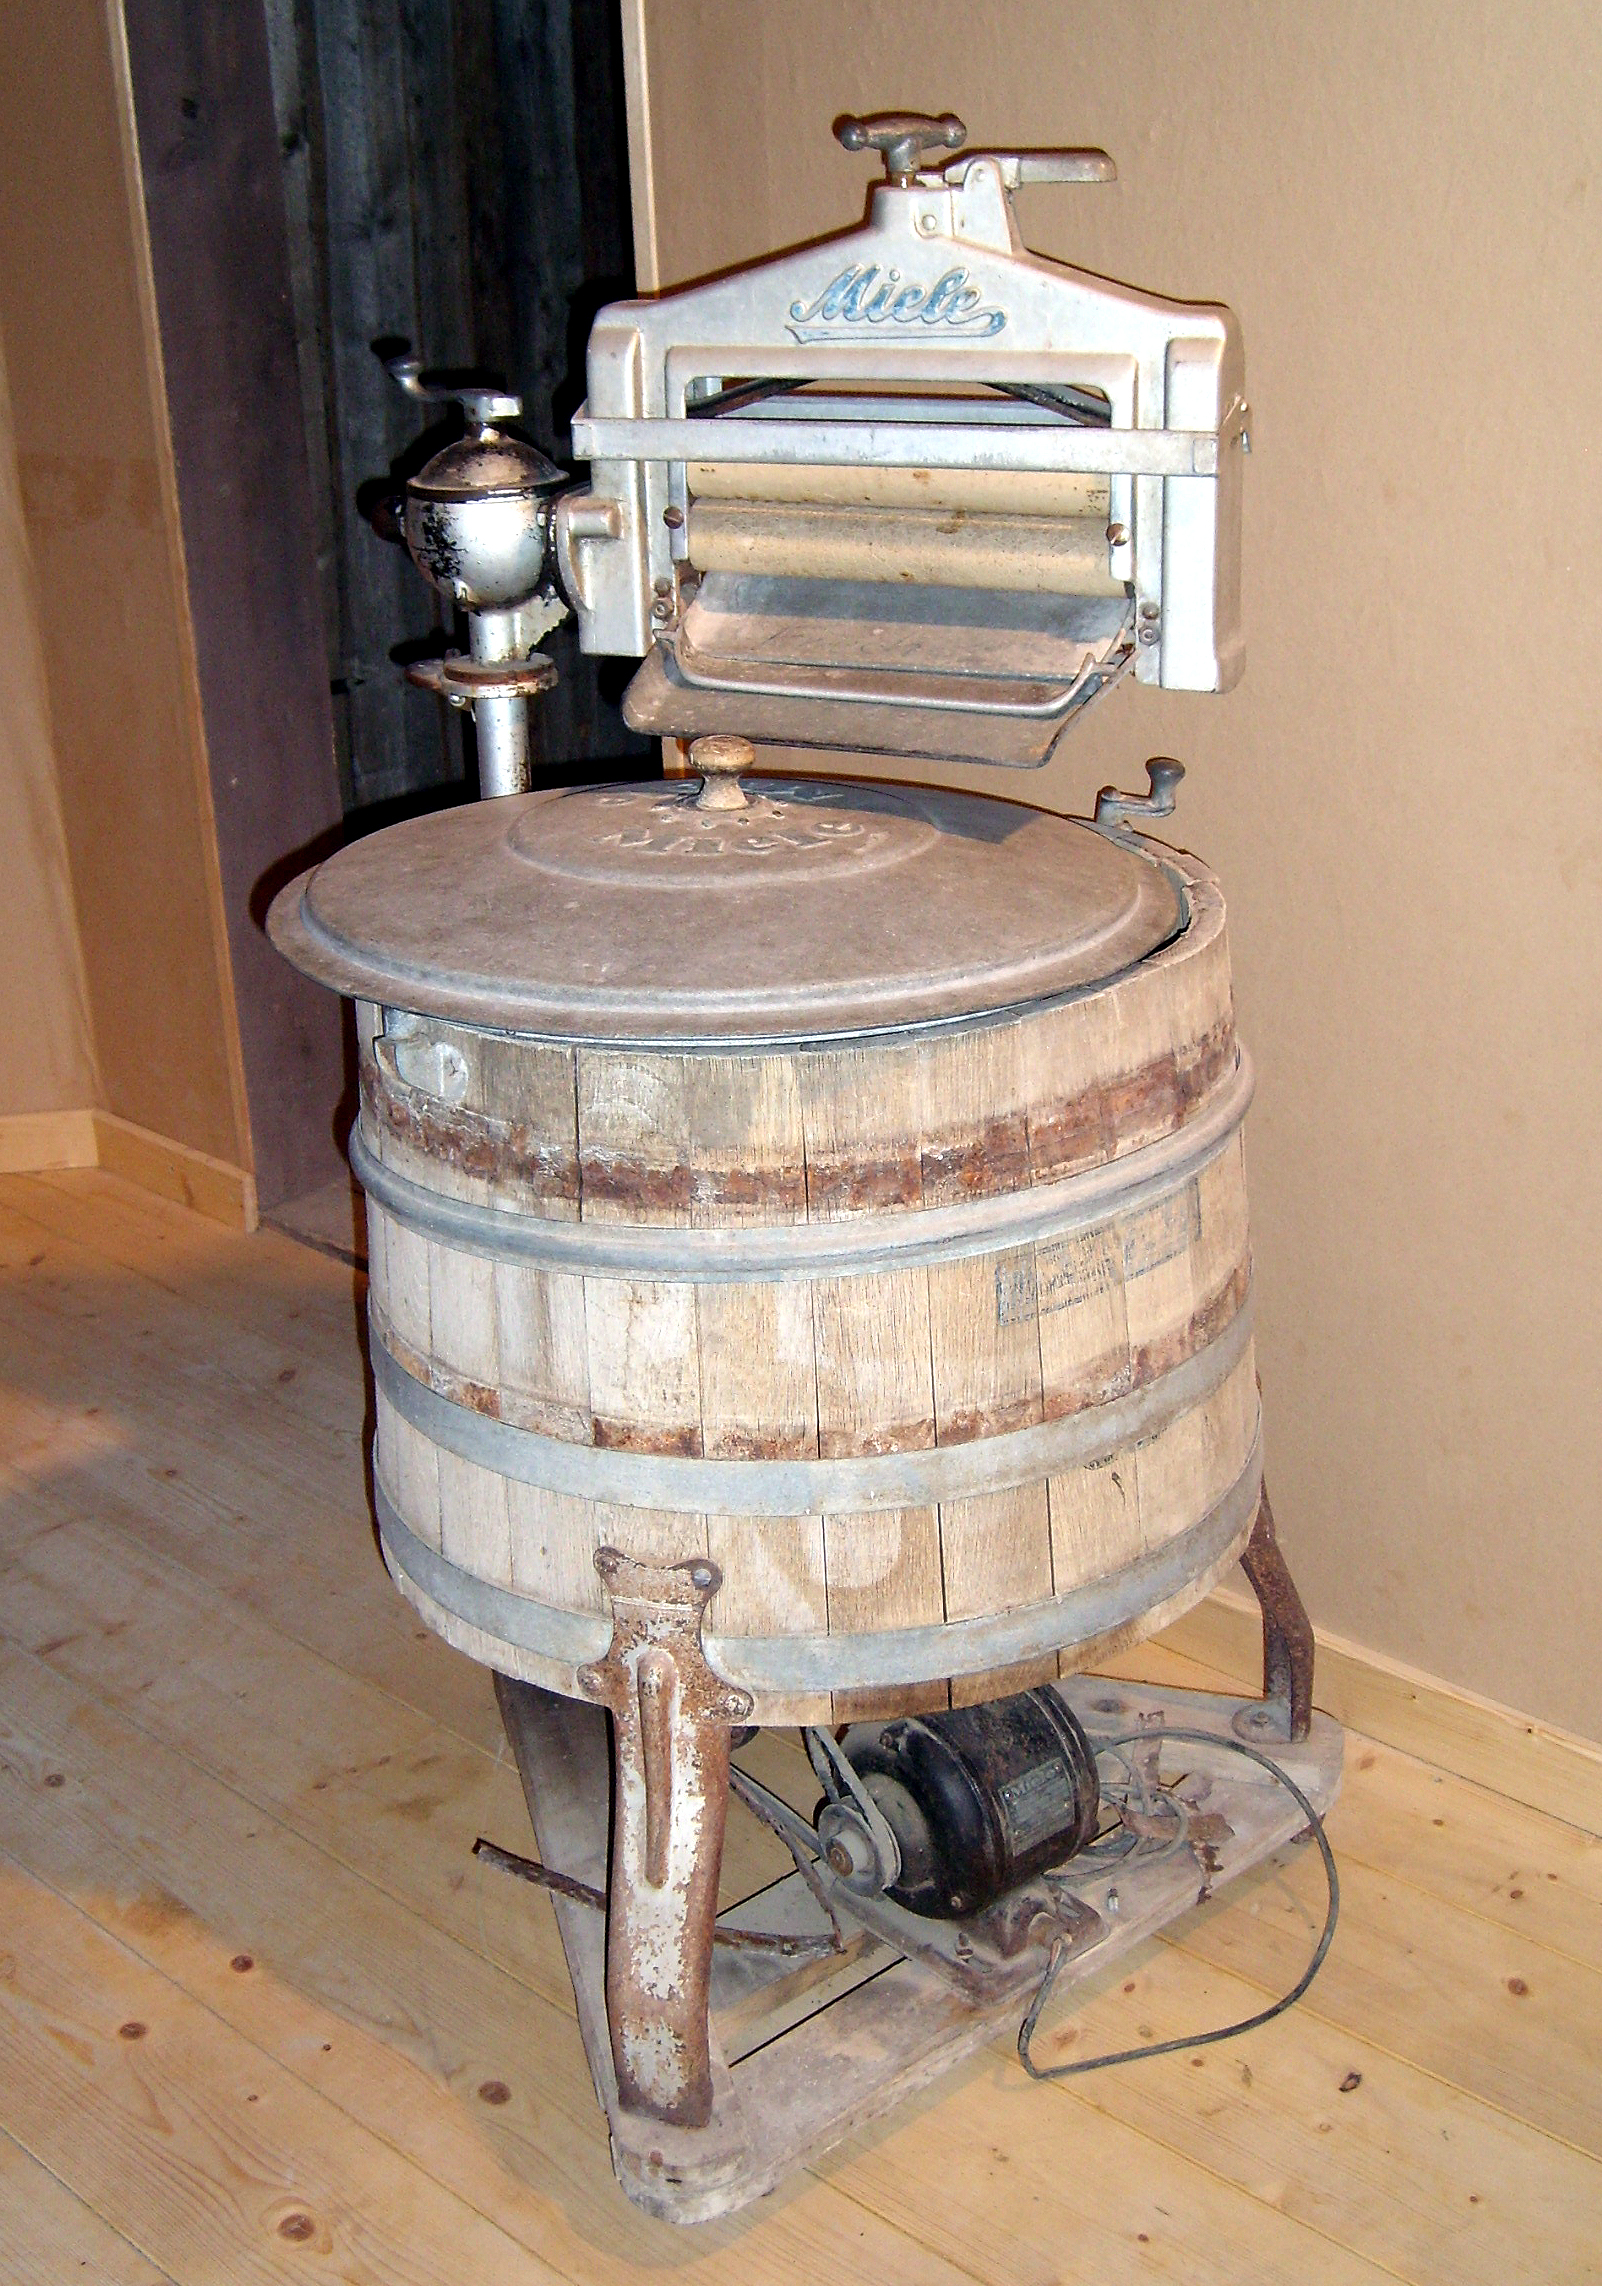 James King Invented And Patented The First Washing Machine Using A Rotating Drum. The Drum Partially Filled With Water